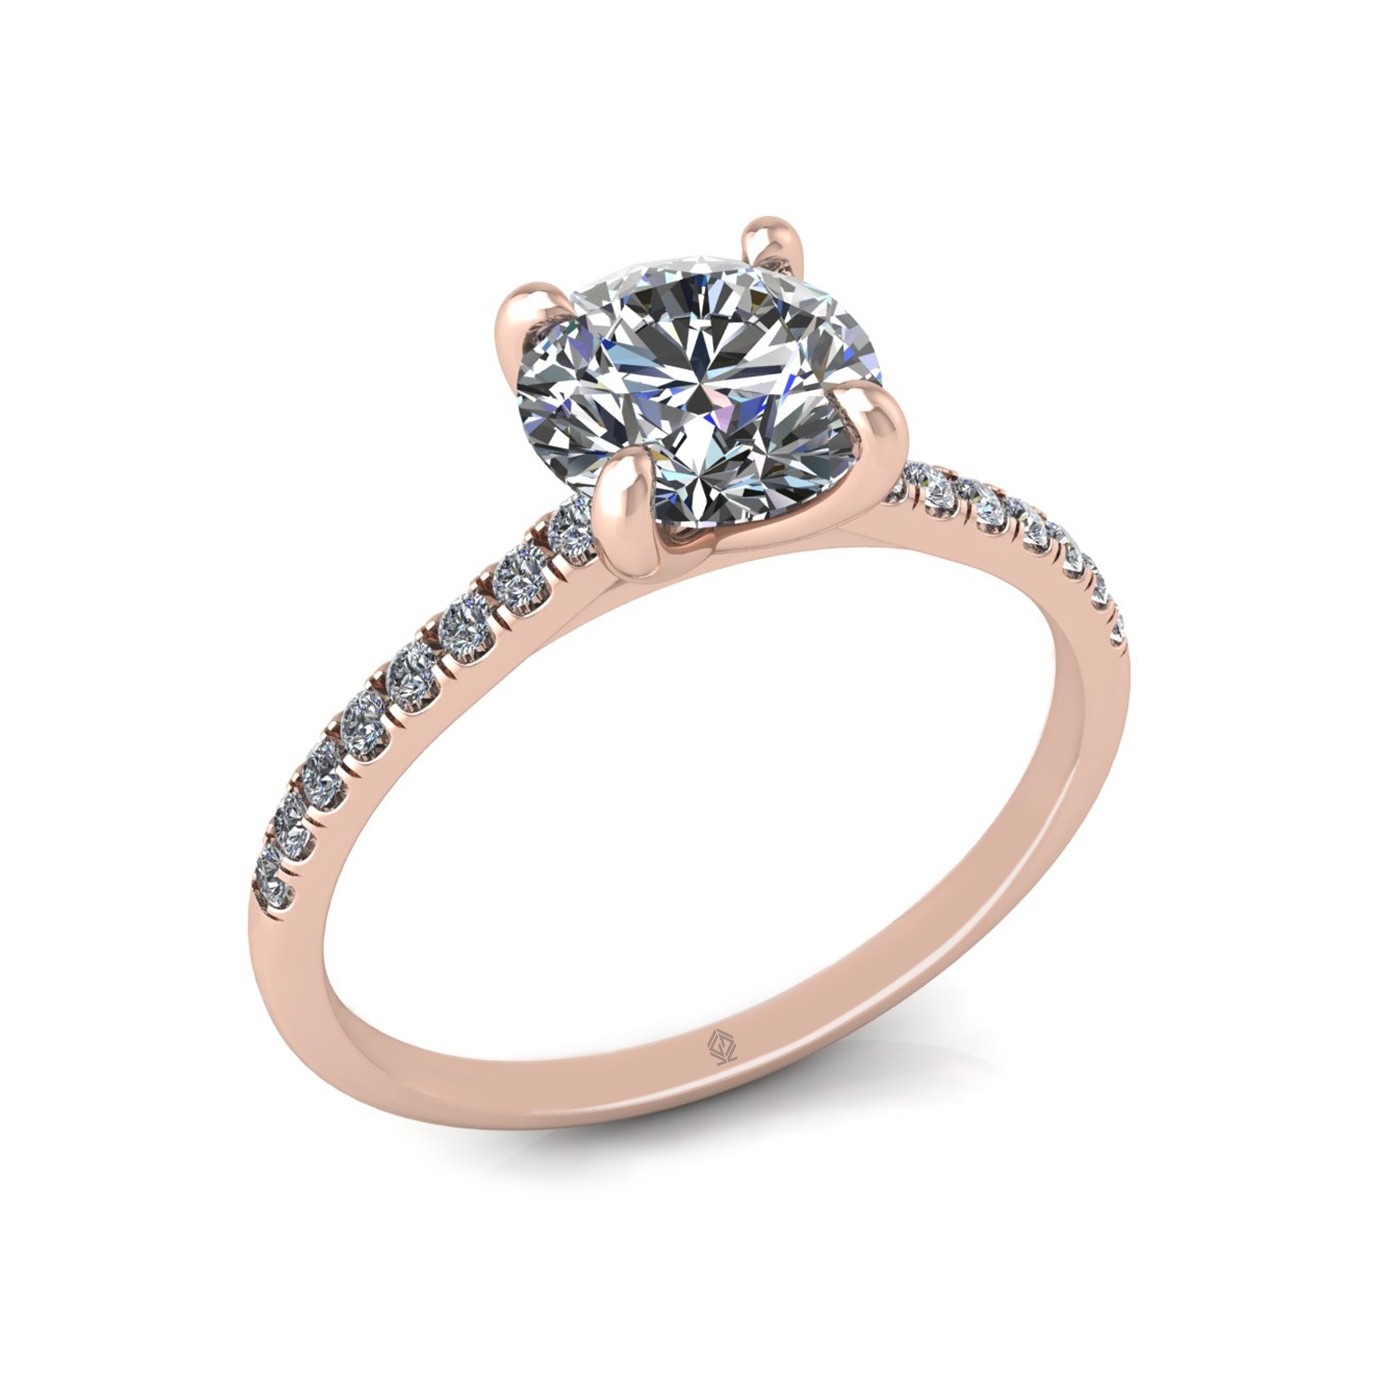 18k rose gold 1.2ct 4 prongs round cut diamond engagement ring with whisper thin pavÉ set band